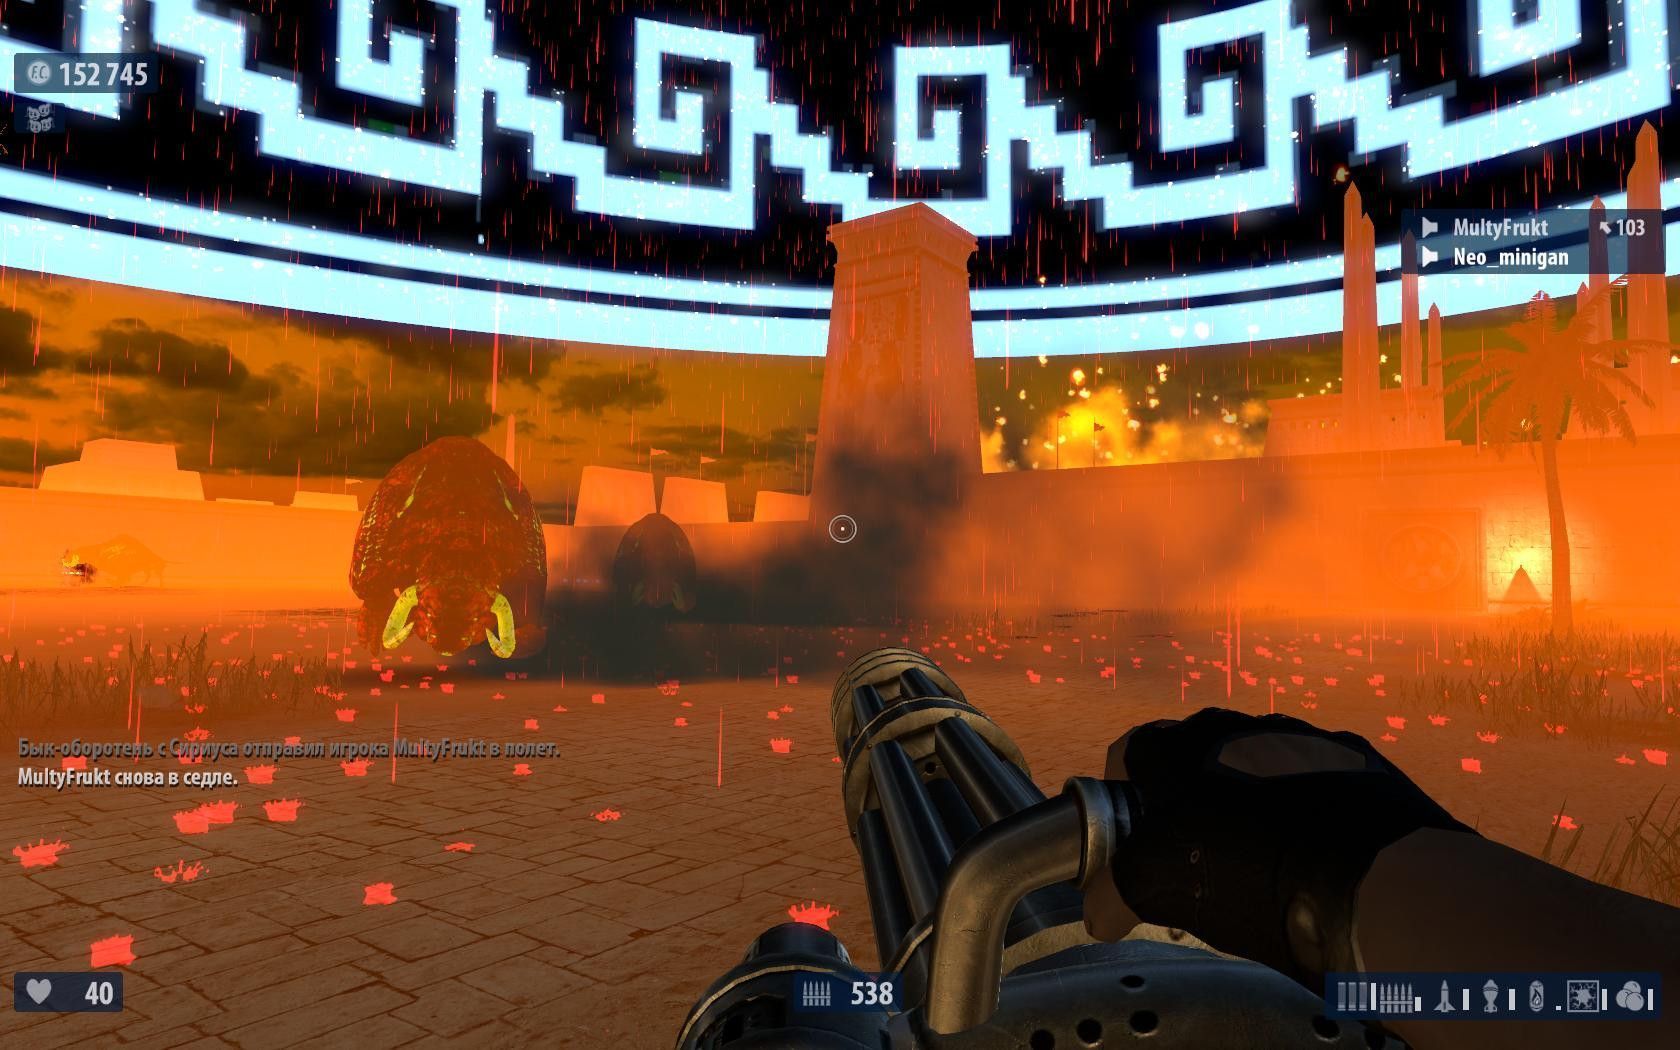 My lucky encounter from the. Serious Sam the first encounter. Крутой Сэм the first encounter. Serious Sam first encounter ночь. Serious Sam the first encounter 2010.